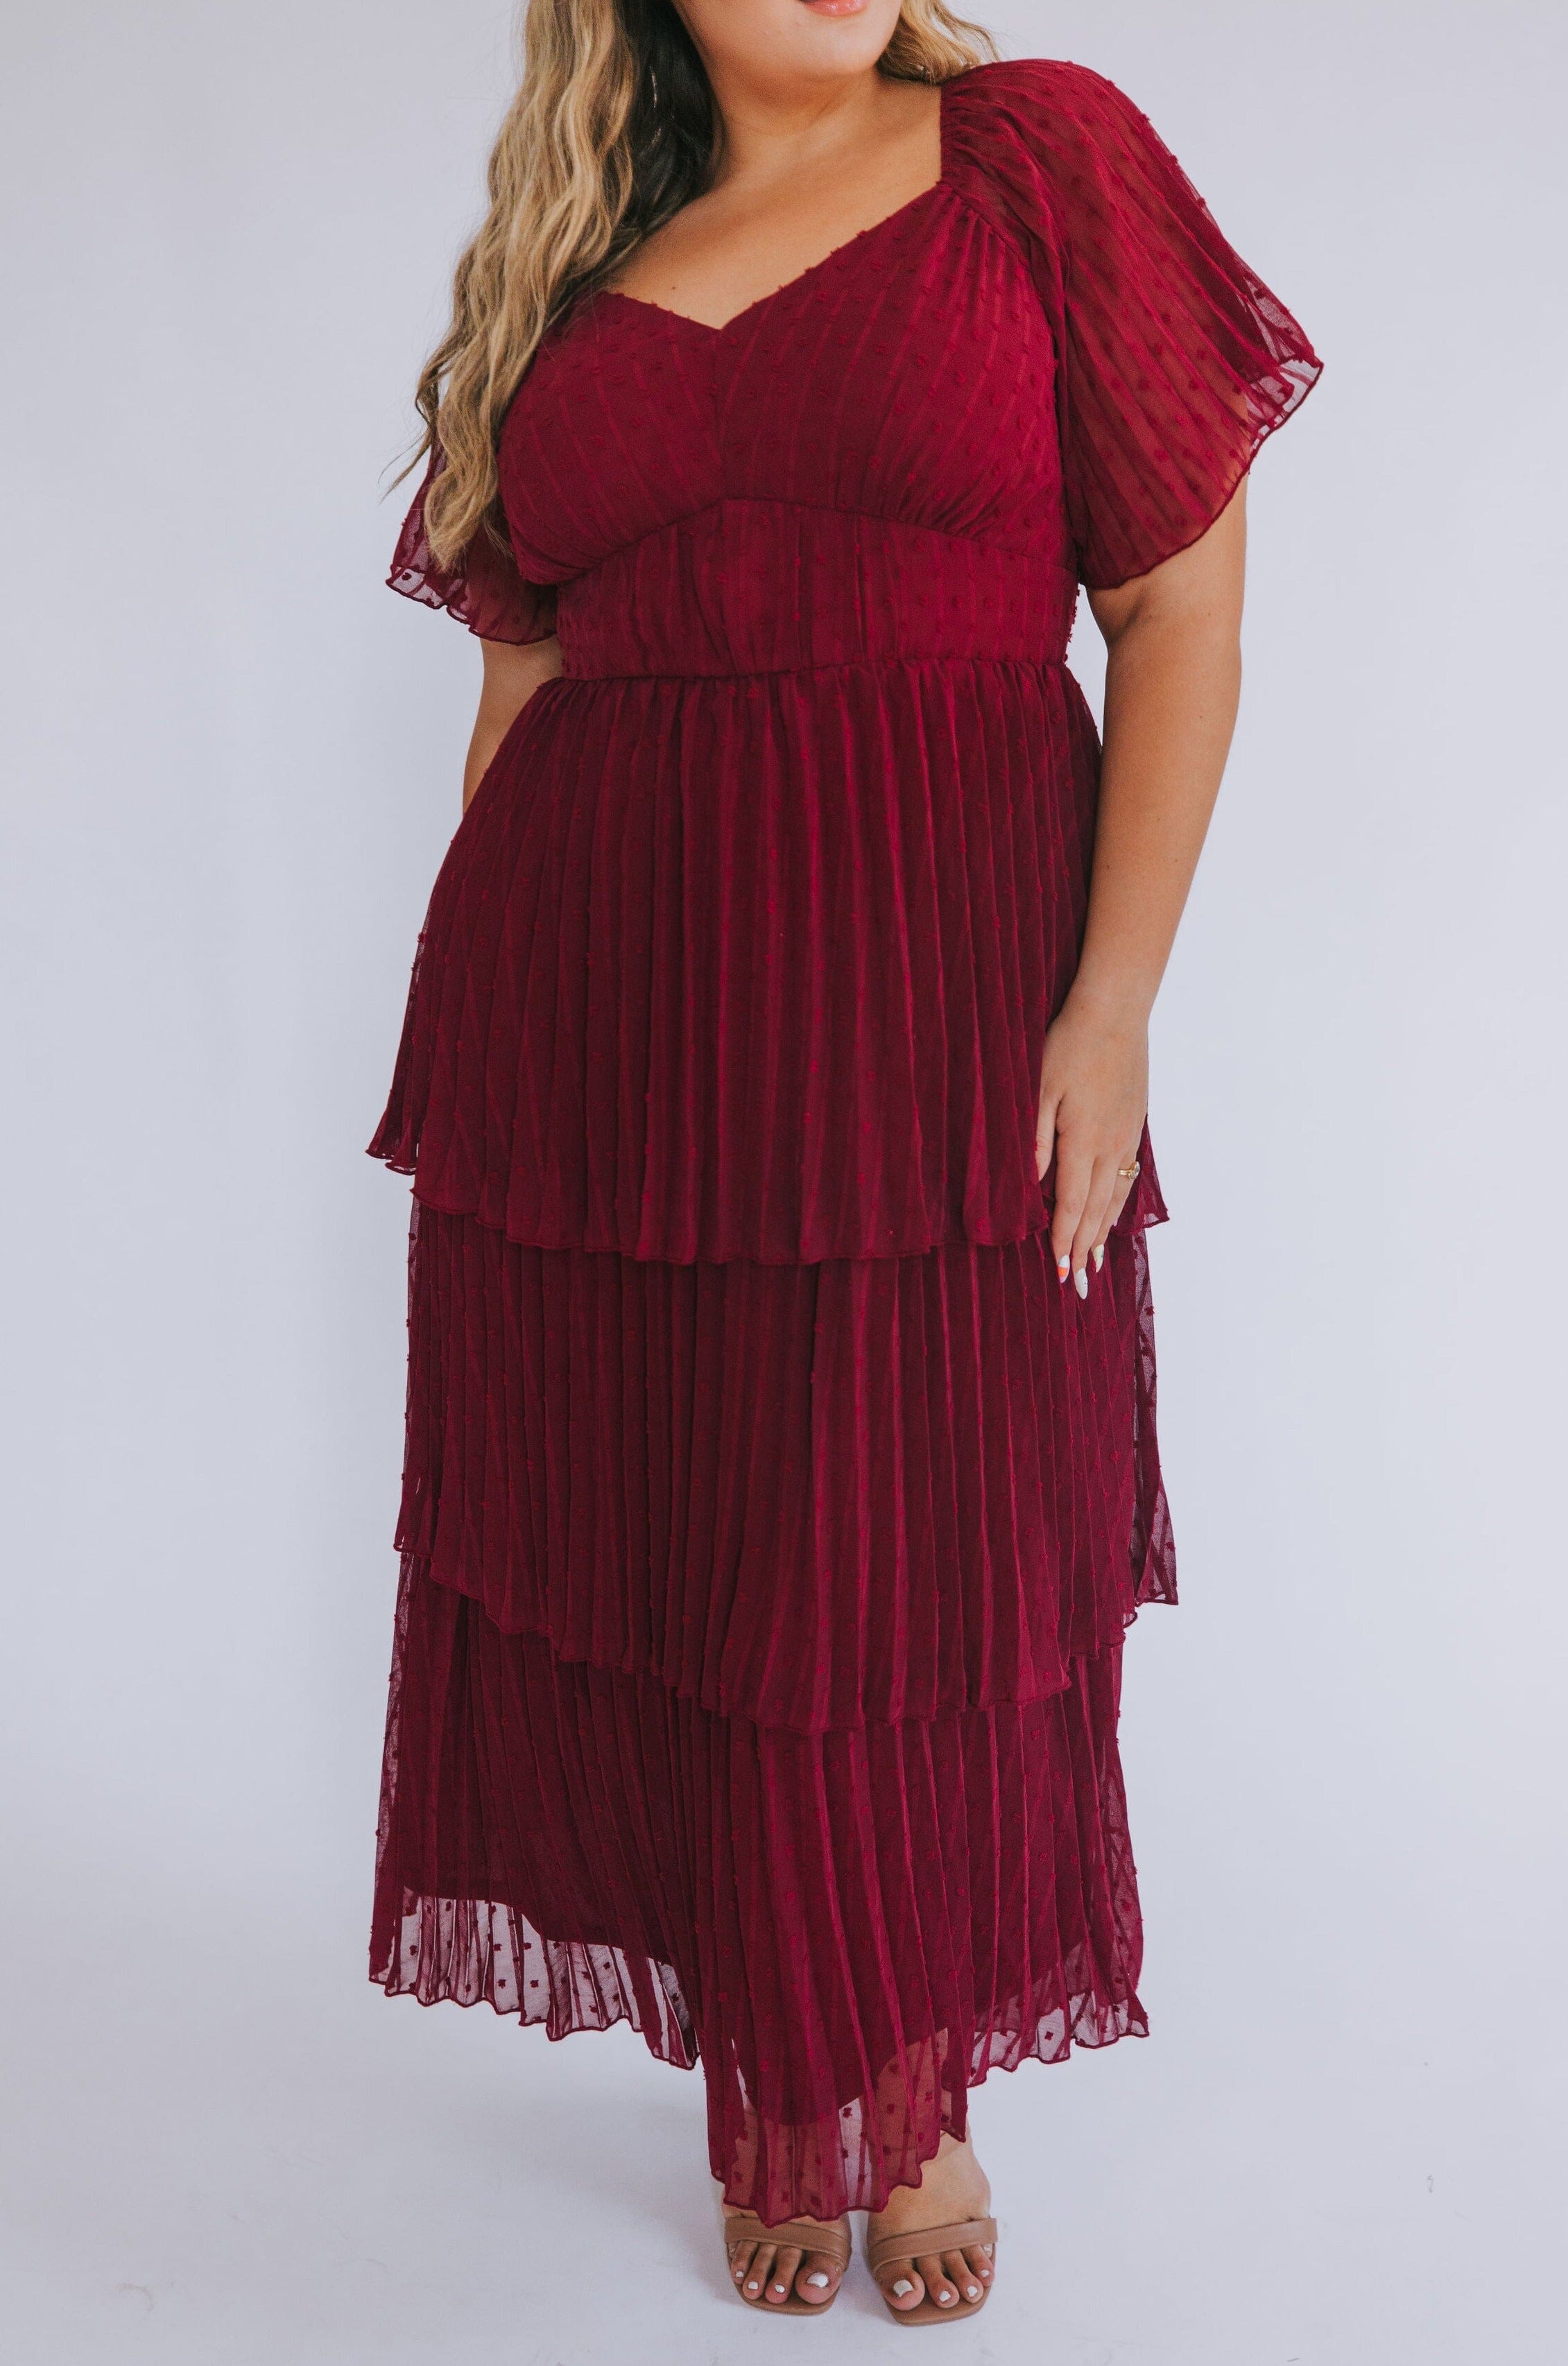 ONE LOVED BABE - Warm Wishes Dress - 4 colors!